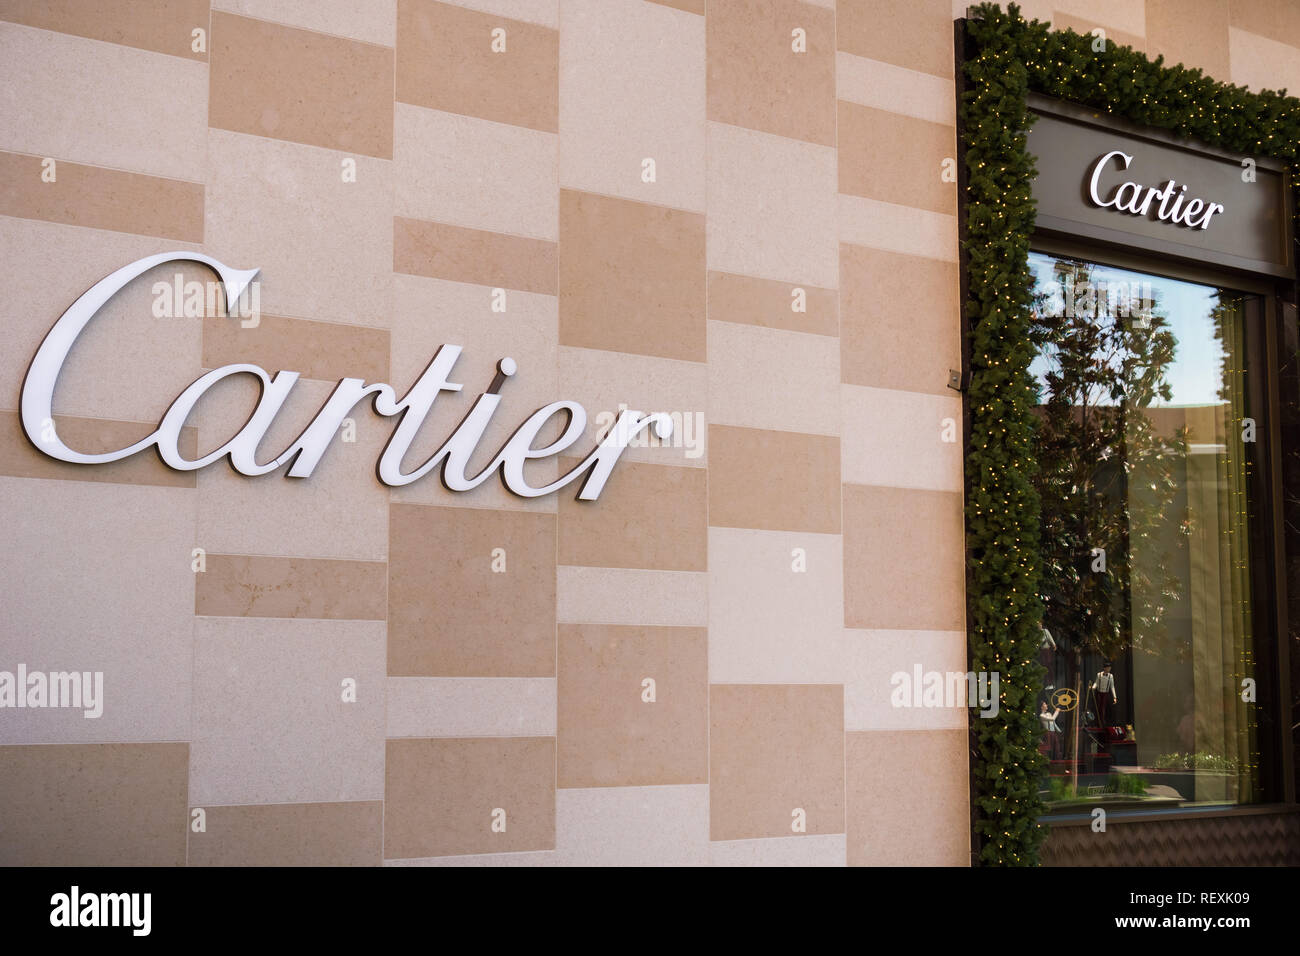 cartier stanford mall